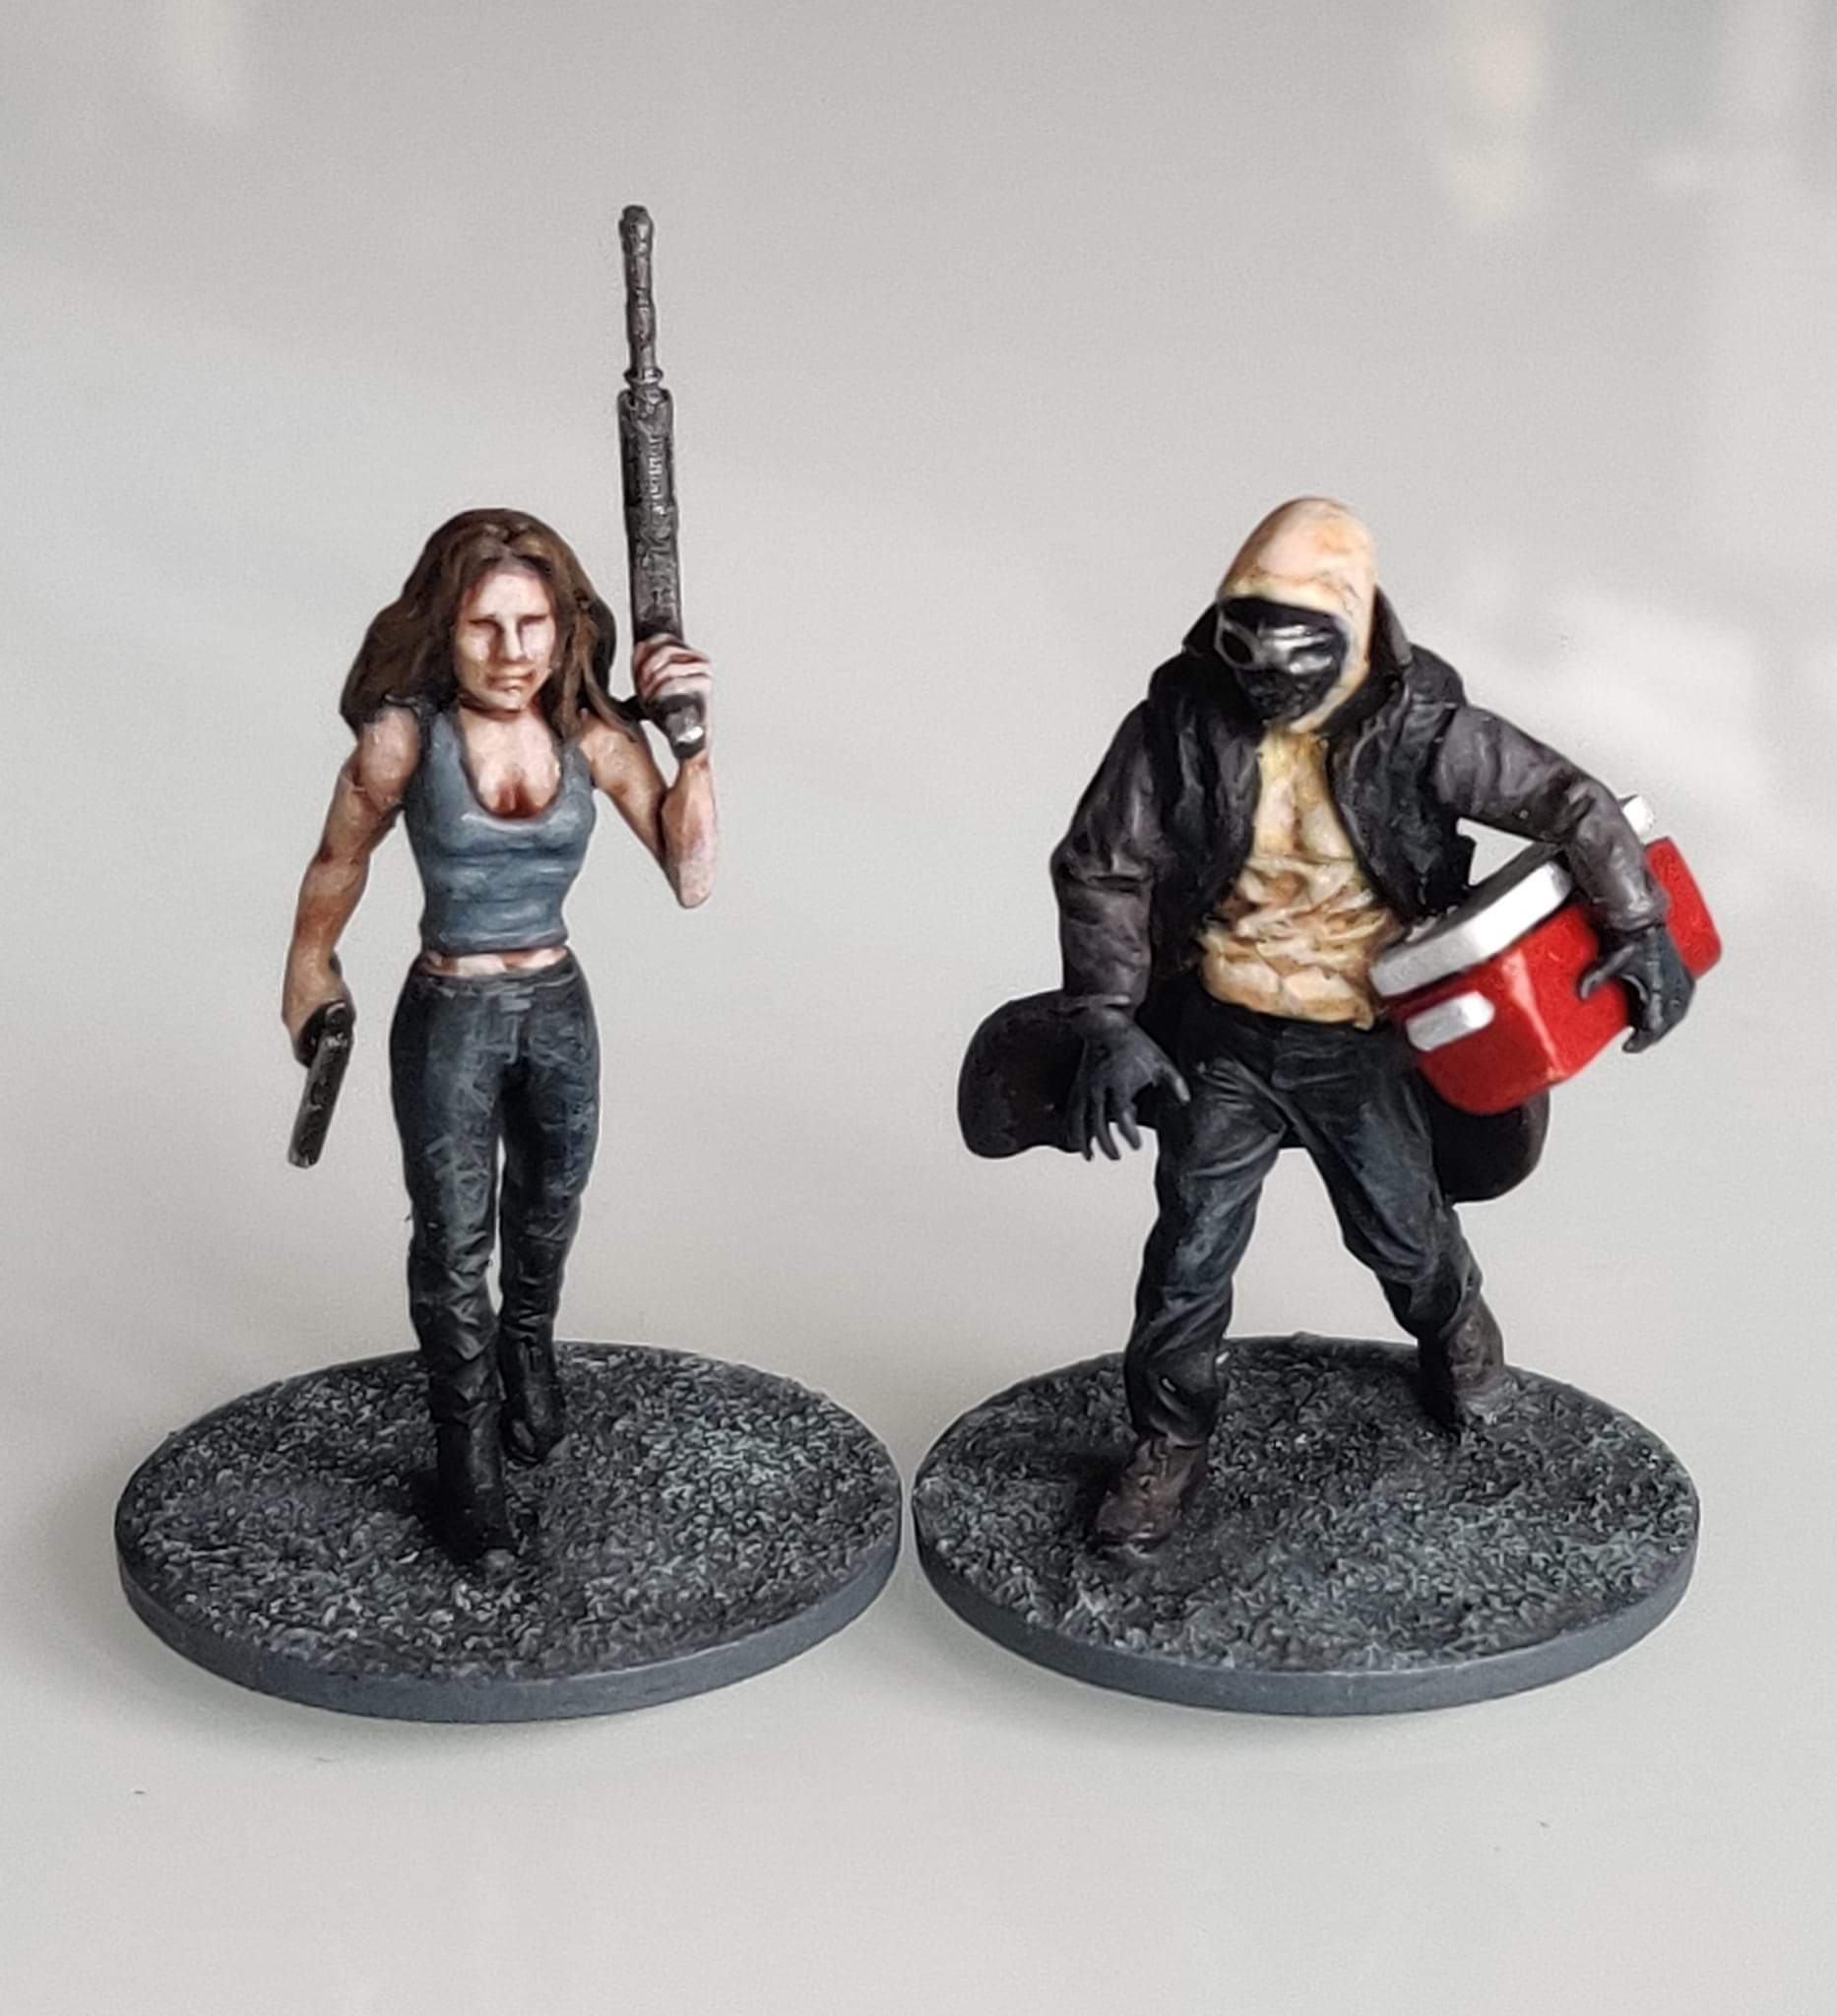 The Terminator Miniatures Game #2 by Stefano1609